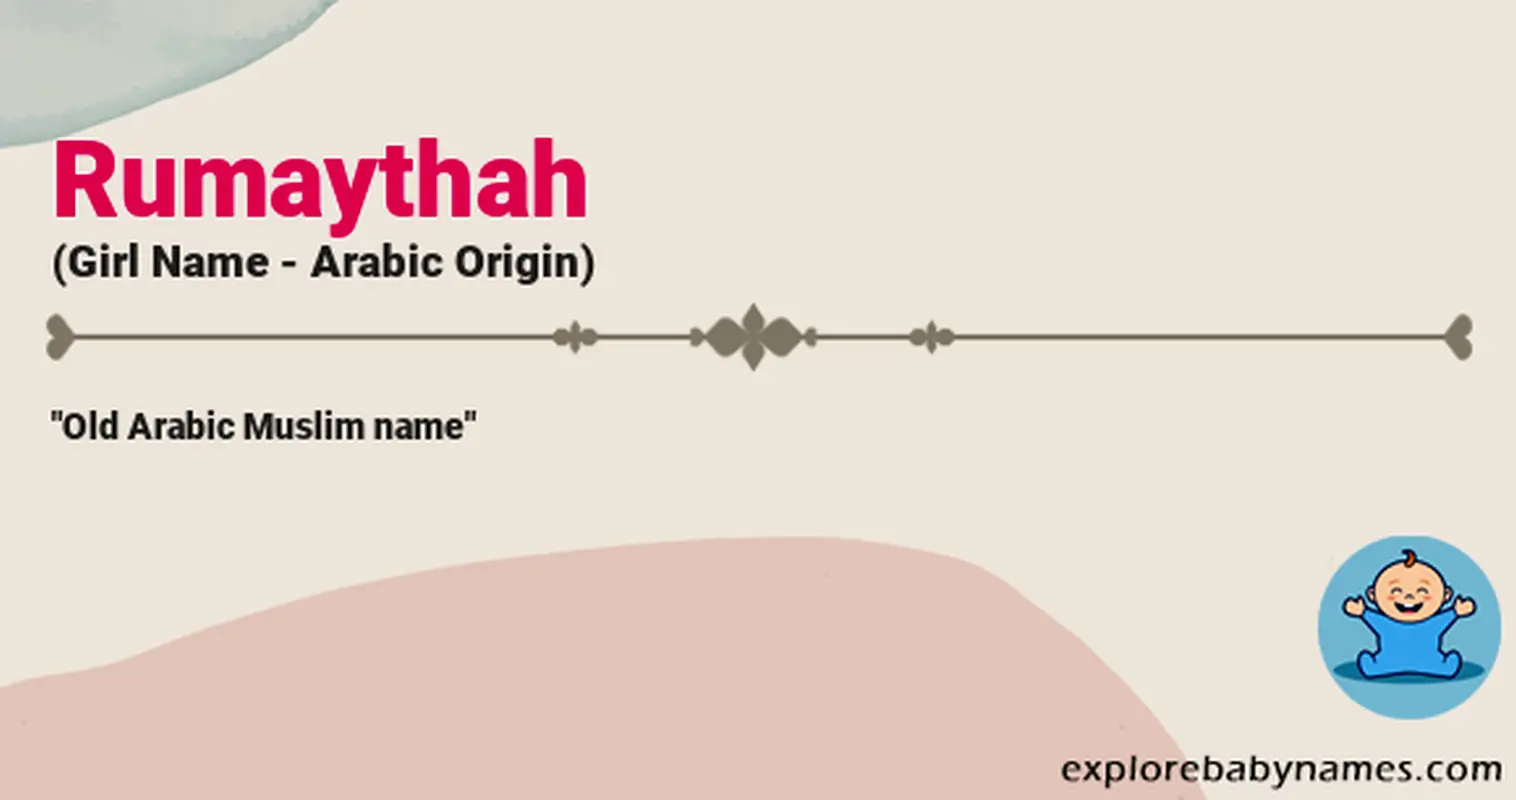 Meaning of Rumaythah